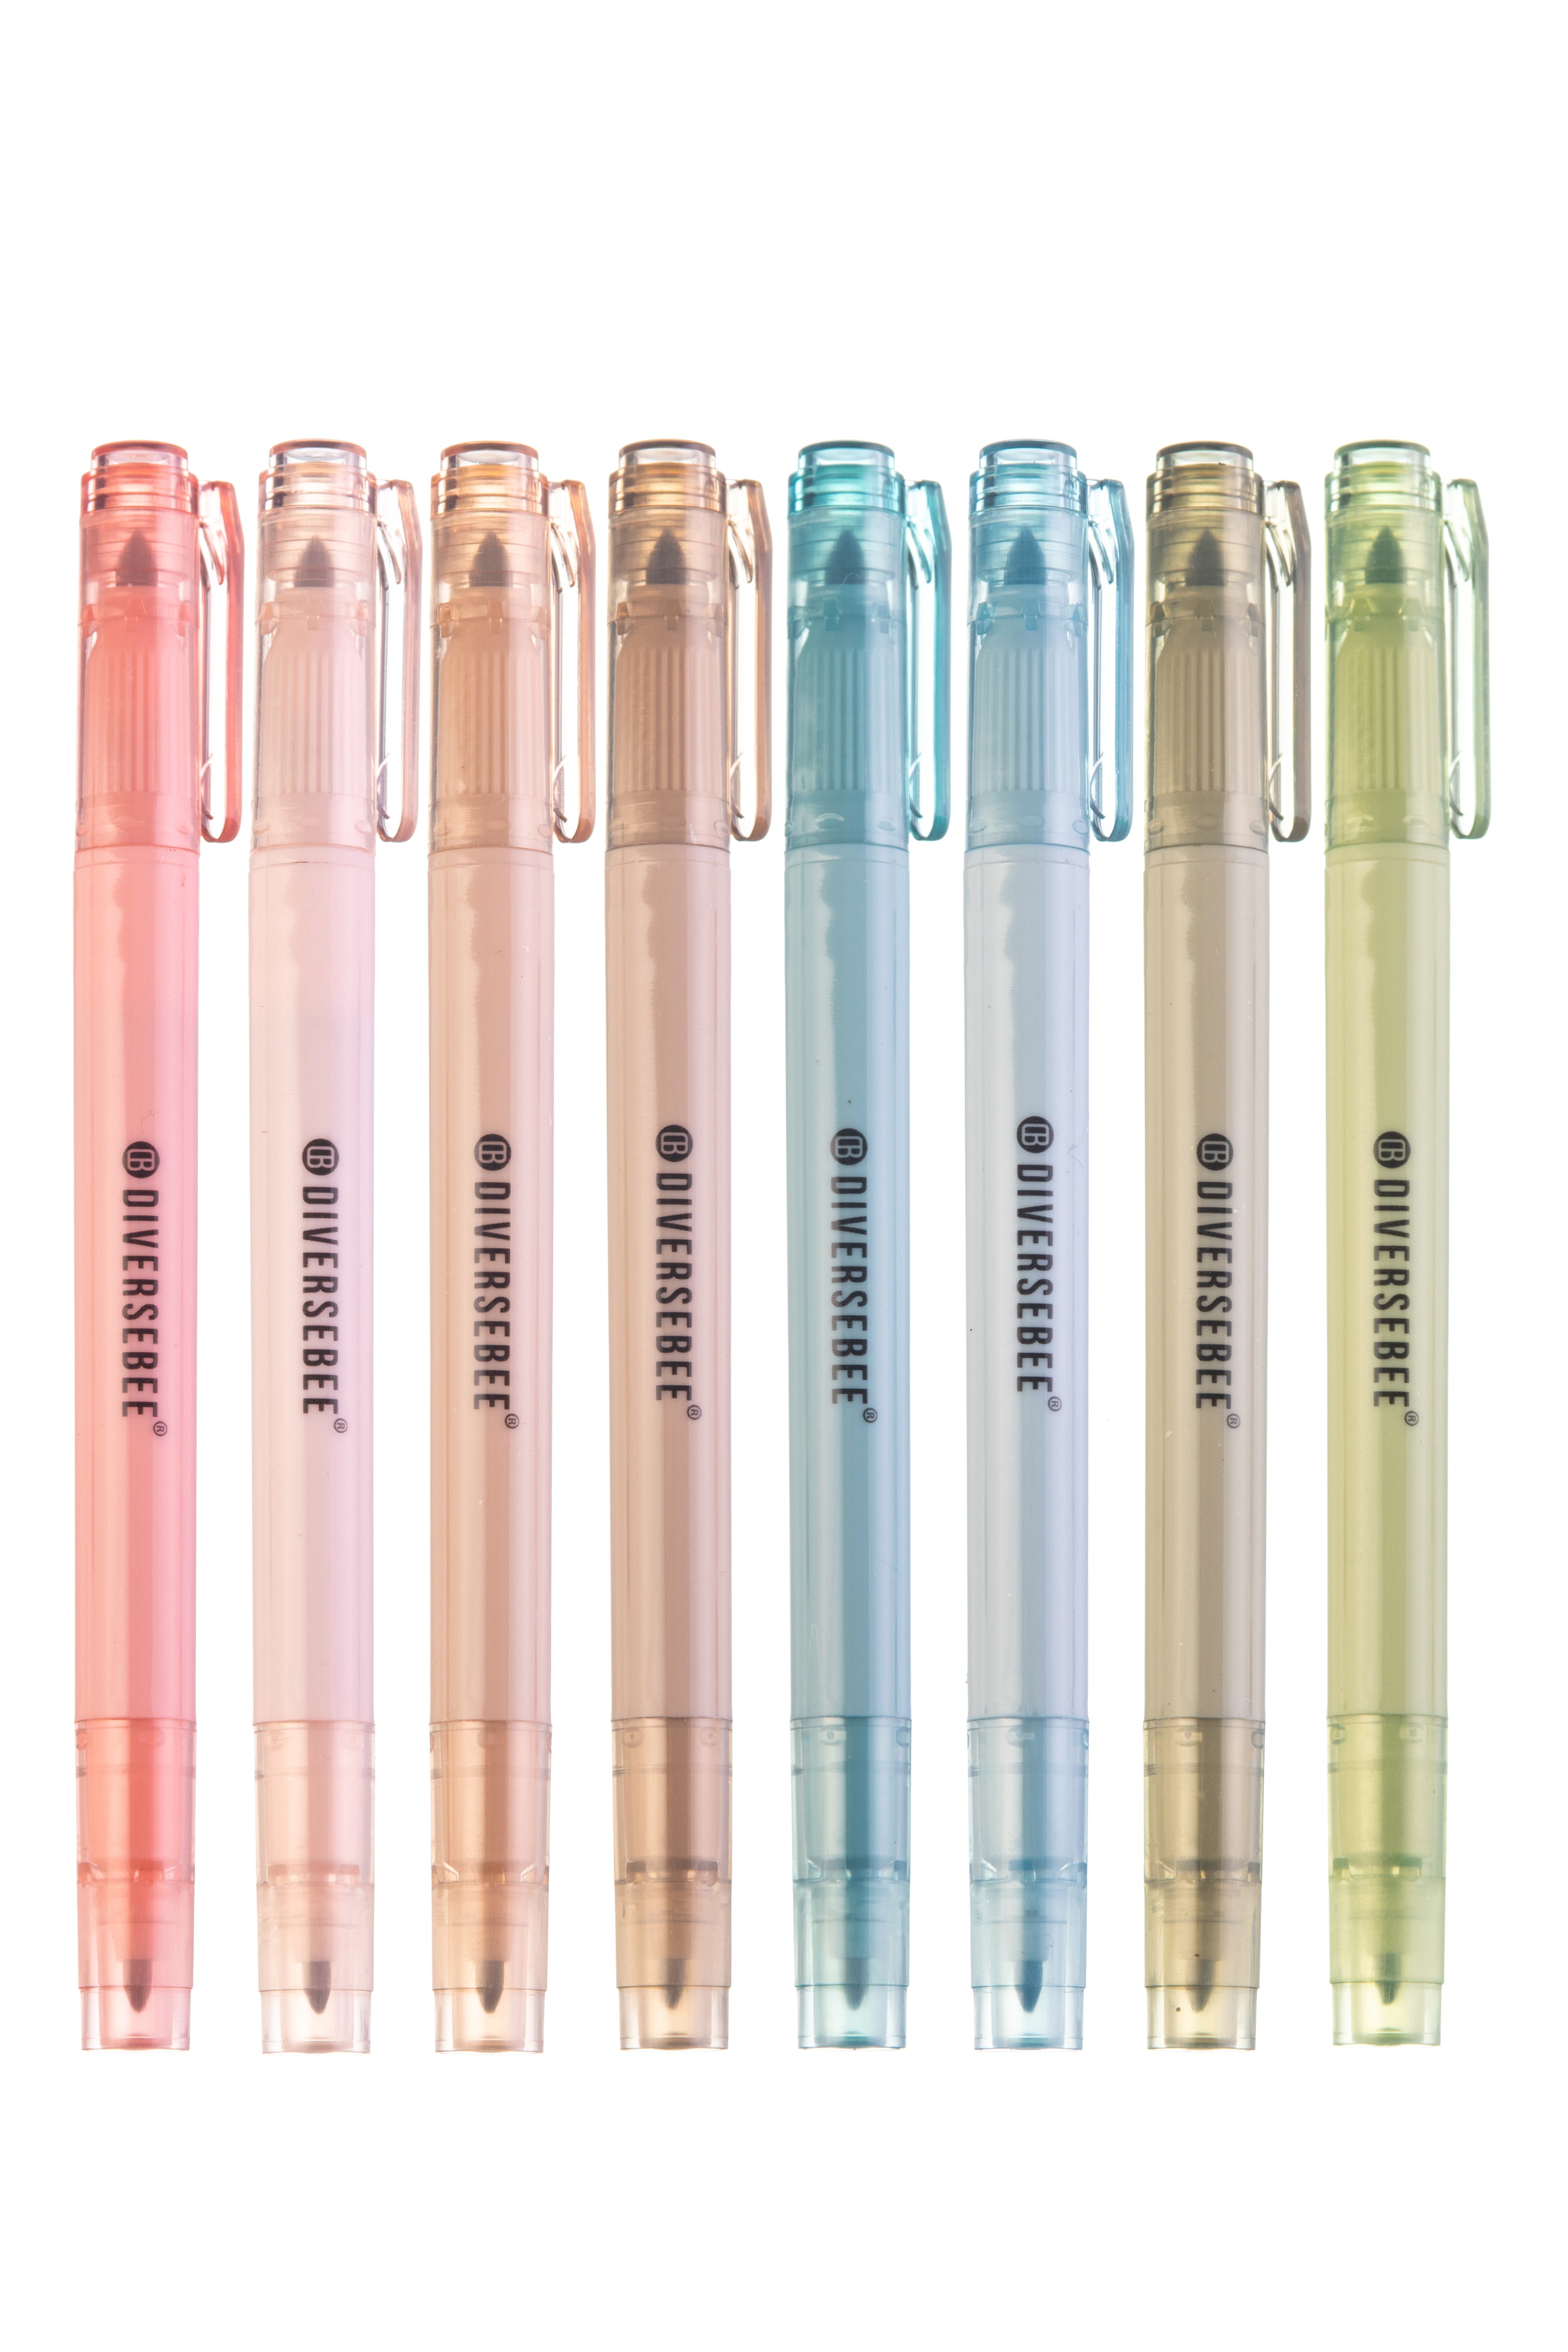  DIVERSEBEE Dual Tip Bible Highlighters and Pens No Bleed, 8  Pack Assorted Colors Quick Dry Highlighters Set, Cute Markers, Bible Study  Journaling School Office Supplies, Bible Accessories : Office Products